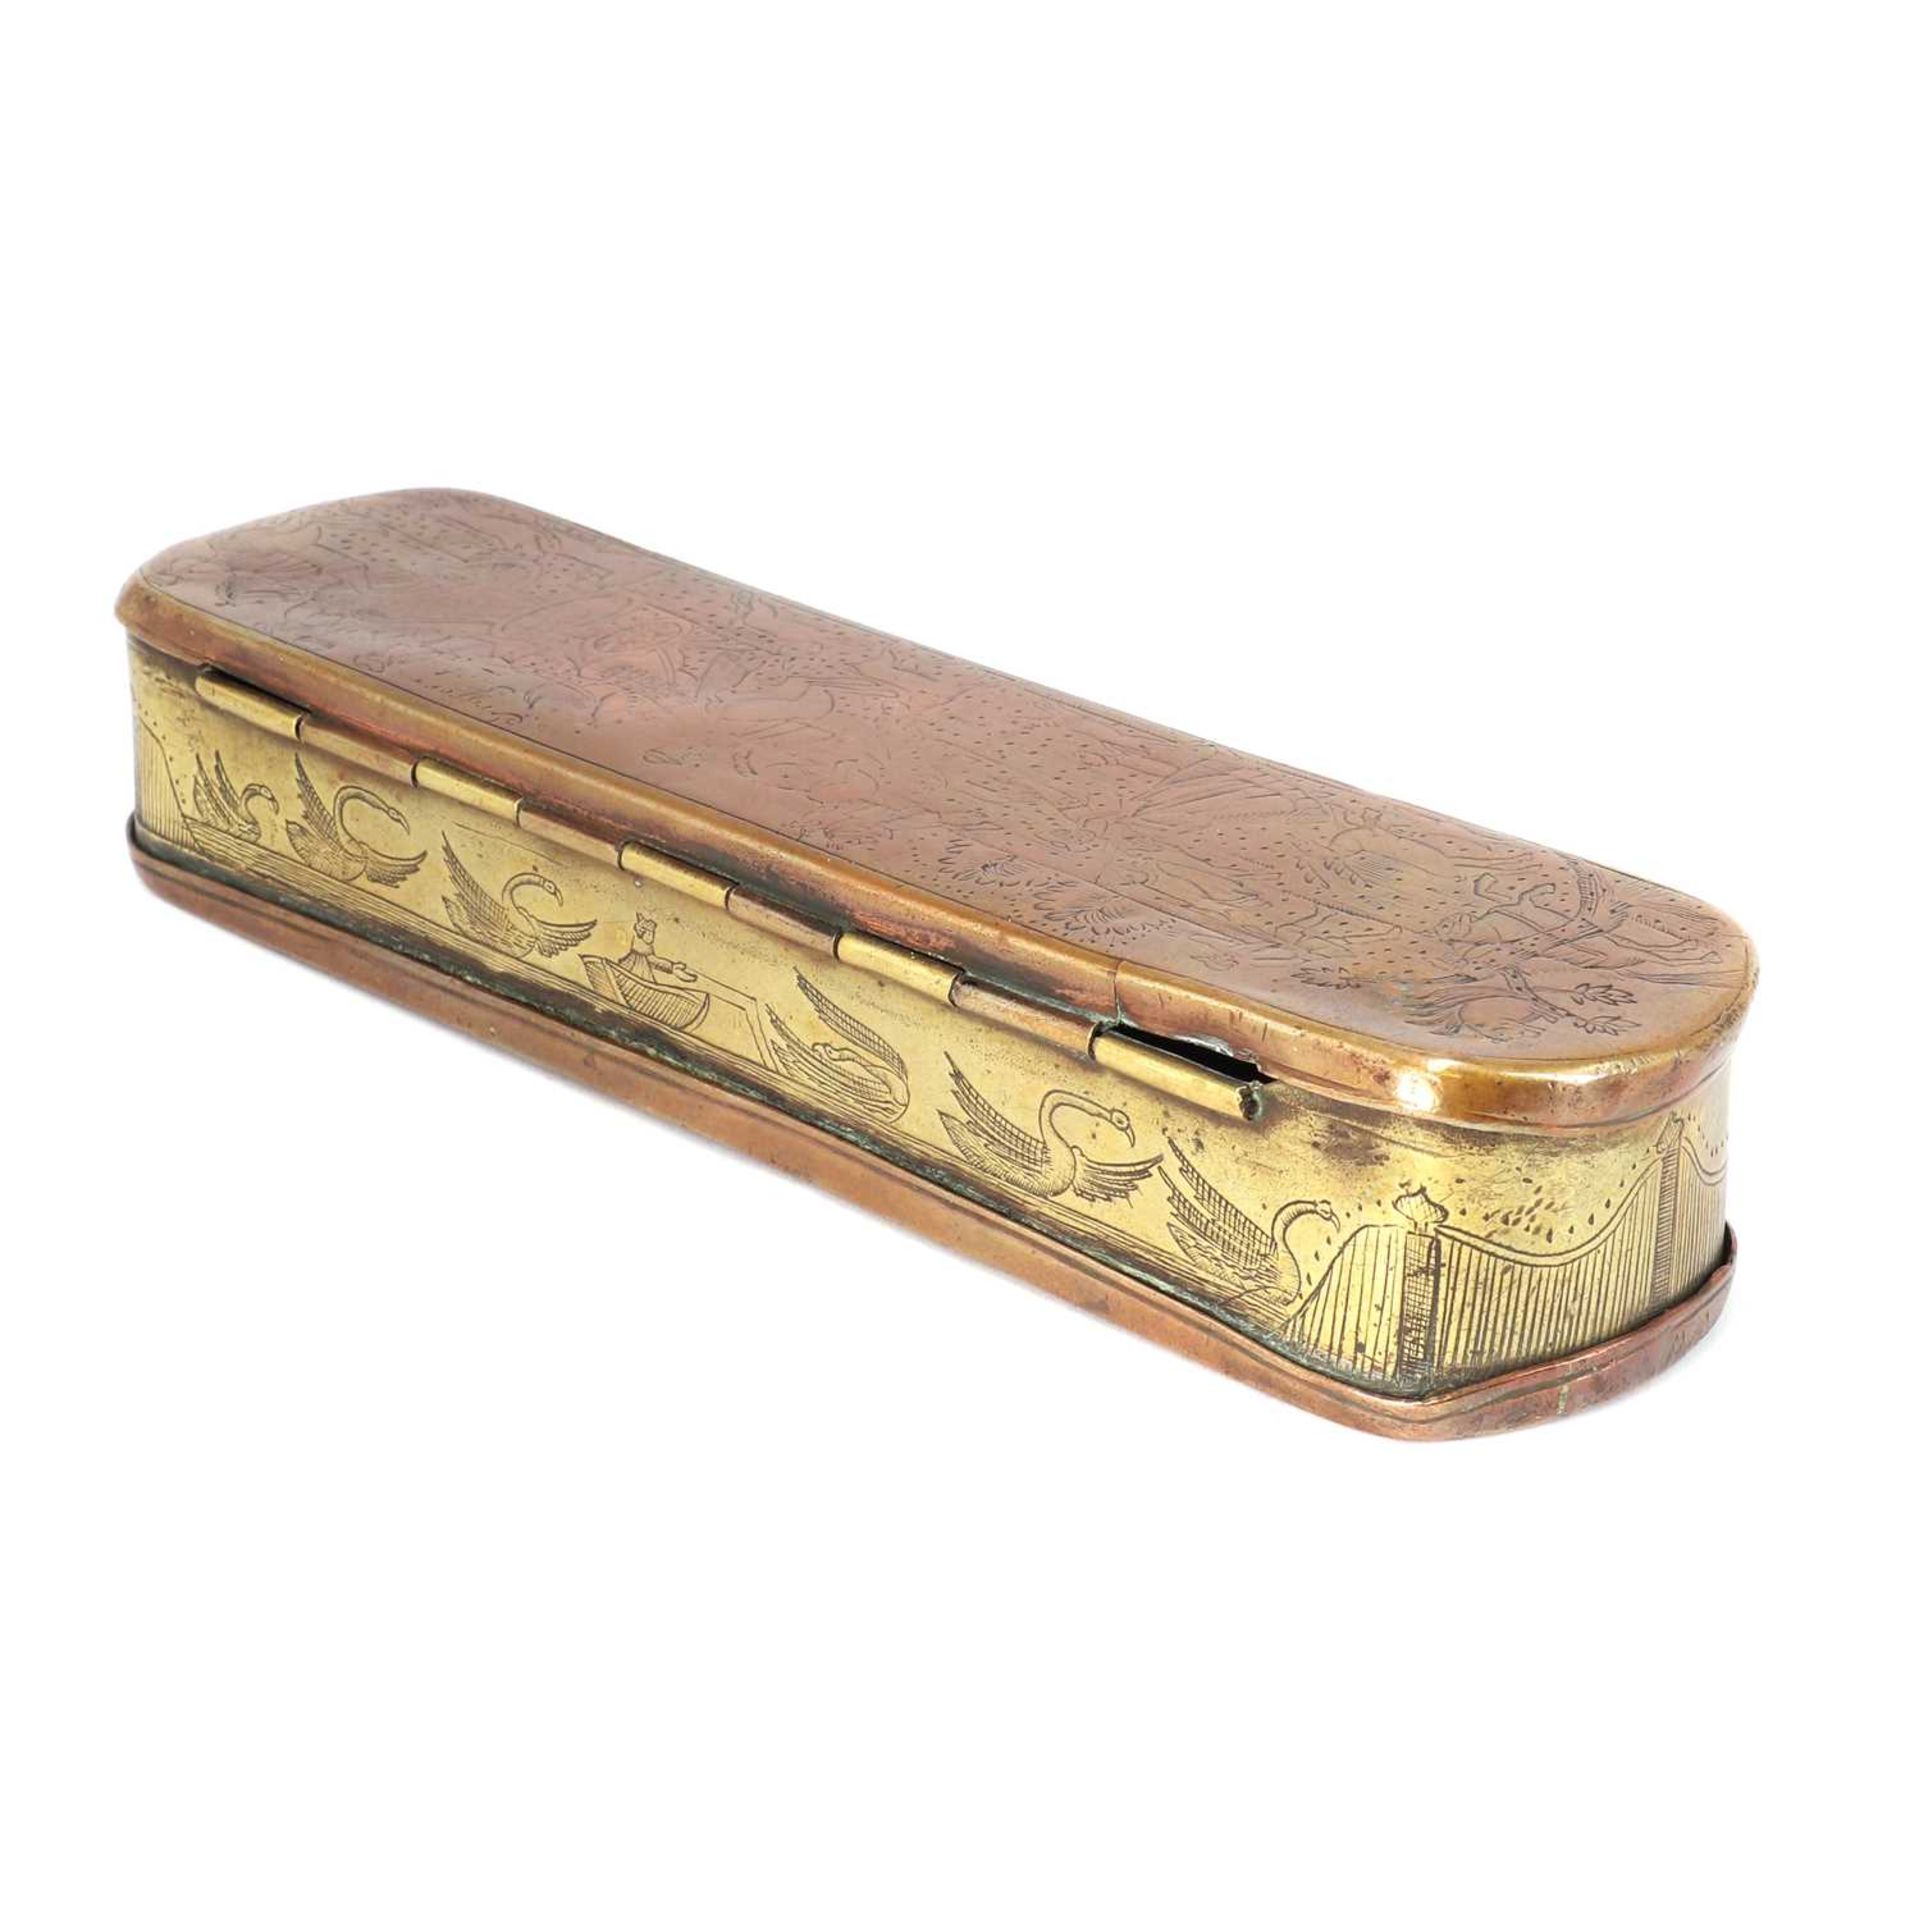 An unusual copper and brass tobacco box, - Image 8 of 9